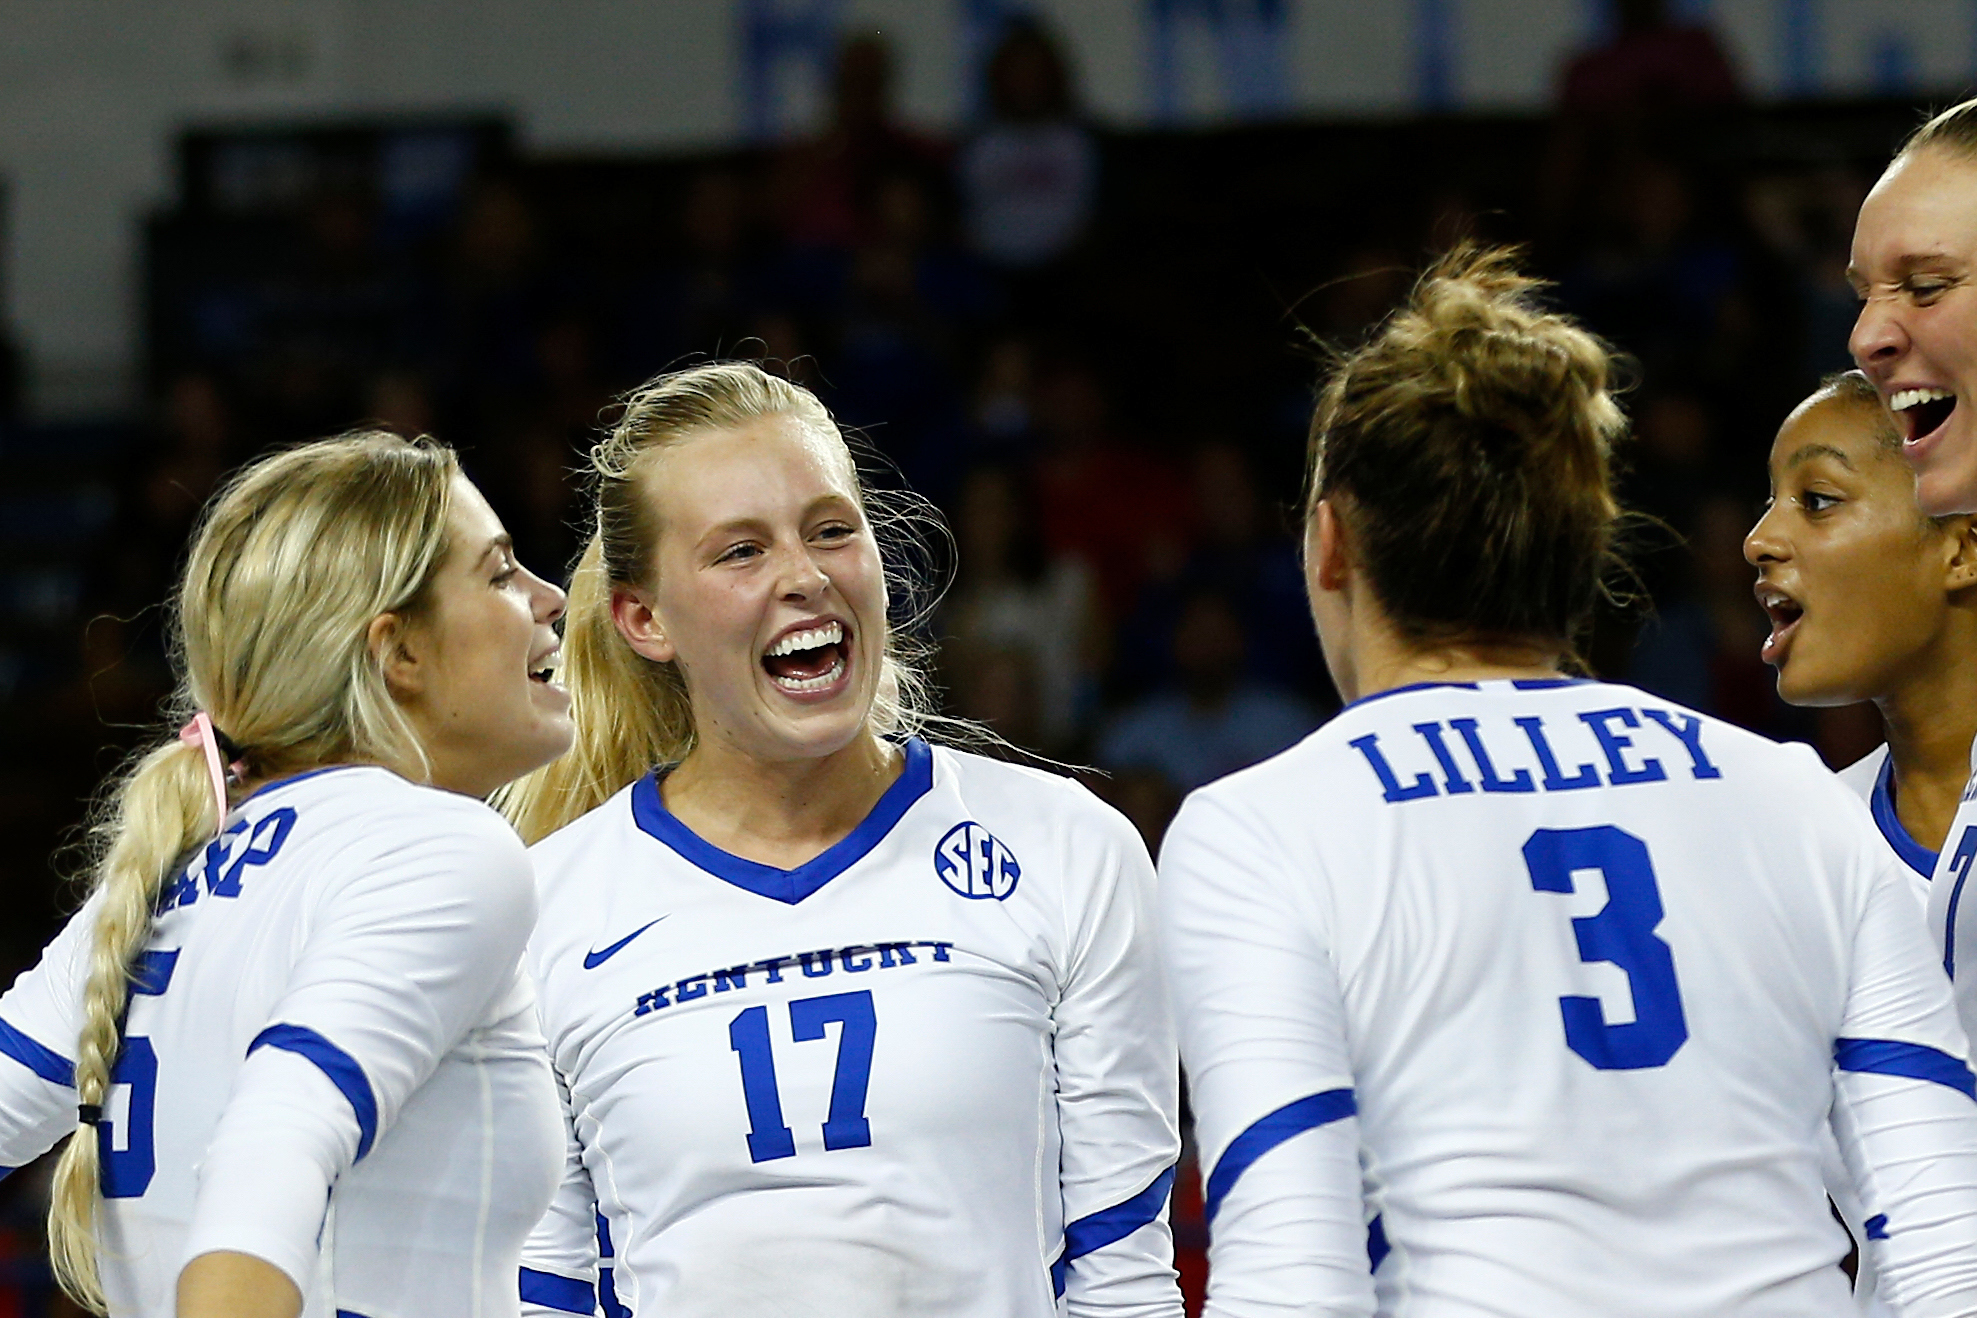 Kentucky Ranked No. 3 in Inaugural AVCA Top-15 Coaches’ Poll